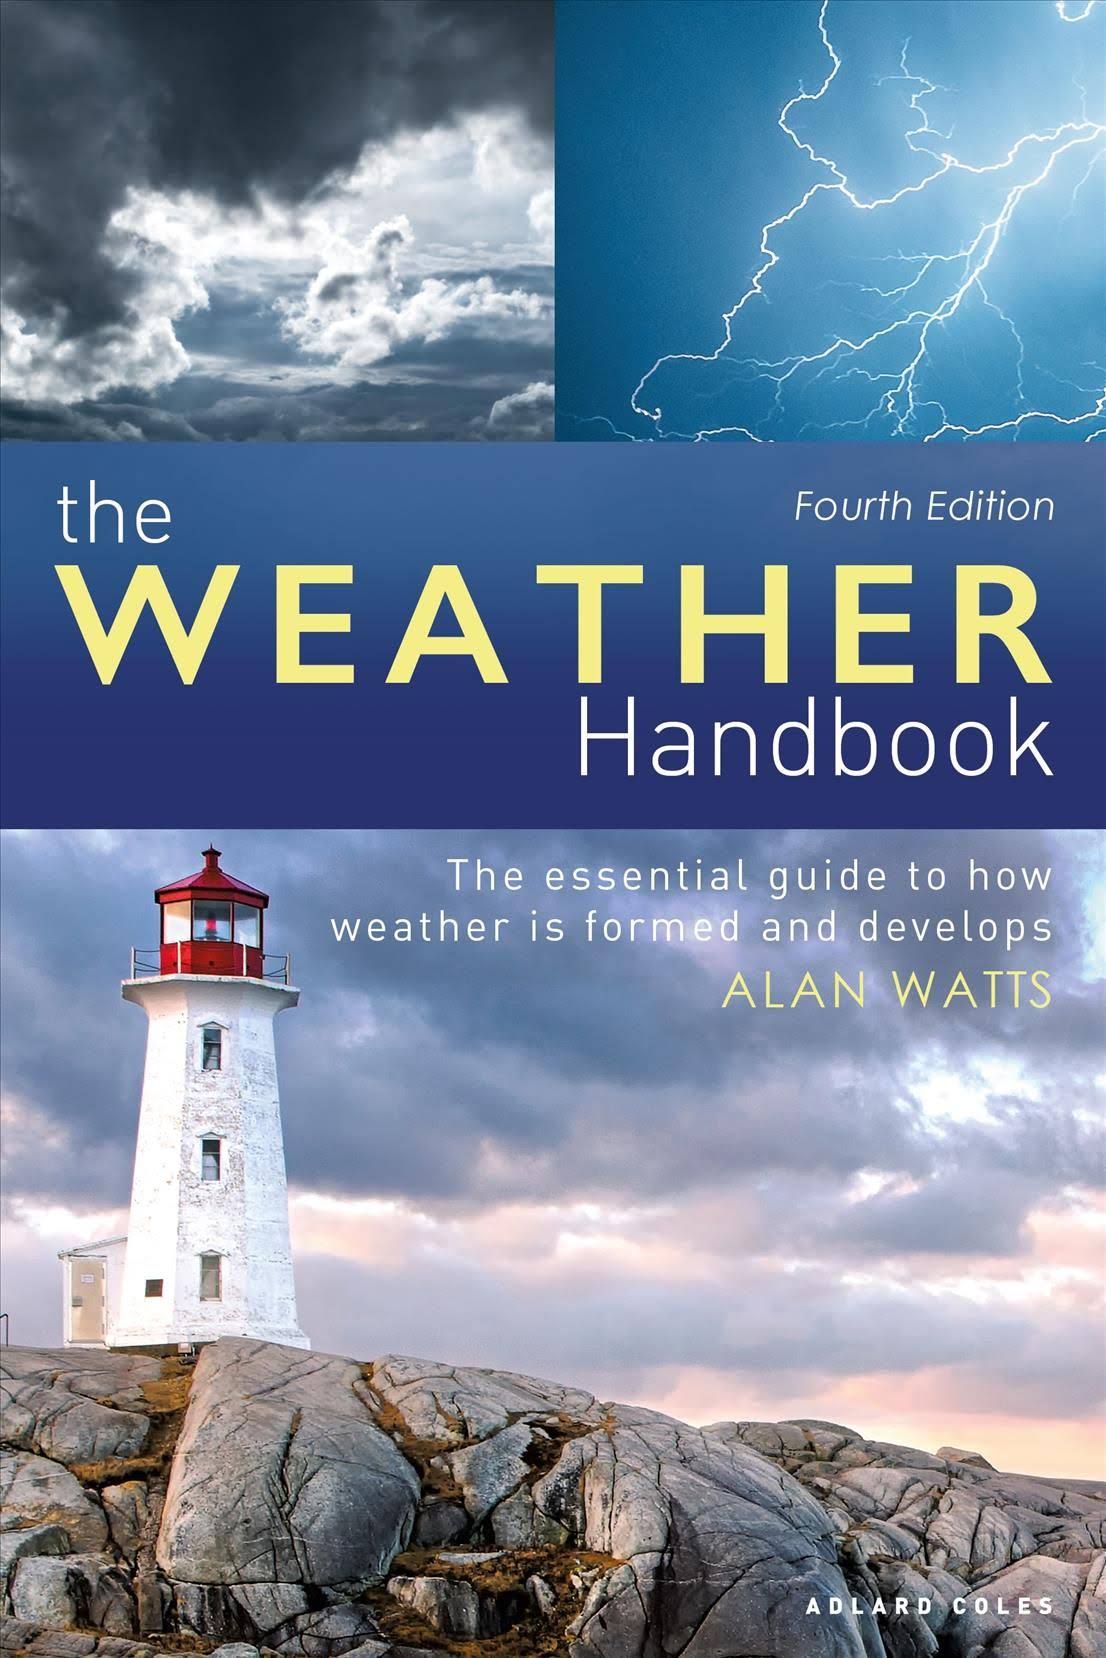 The Weather Handbook: The Essential Guide to How Weather is Formed and Develops [Book]